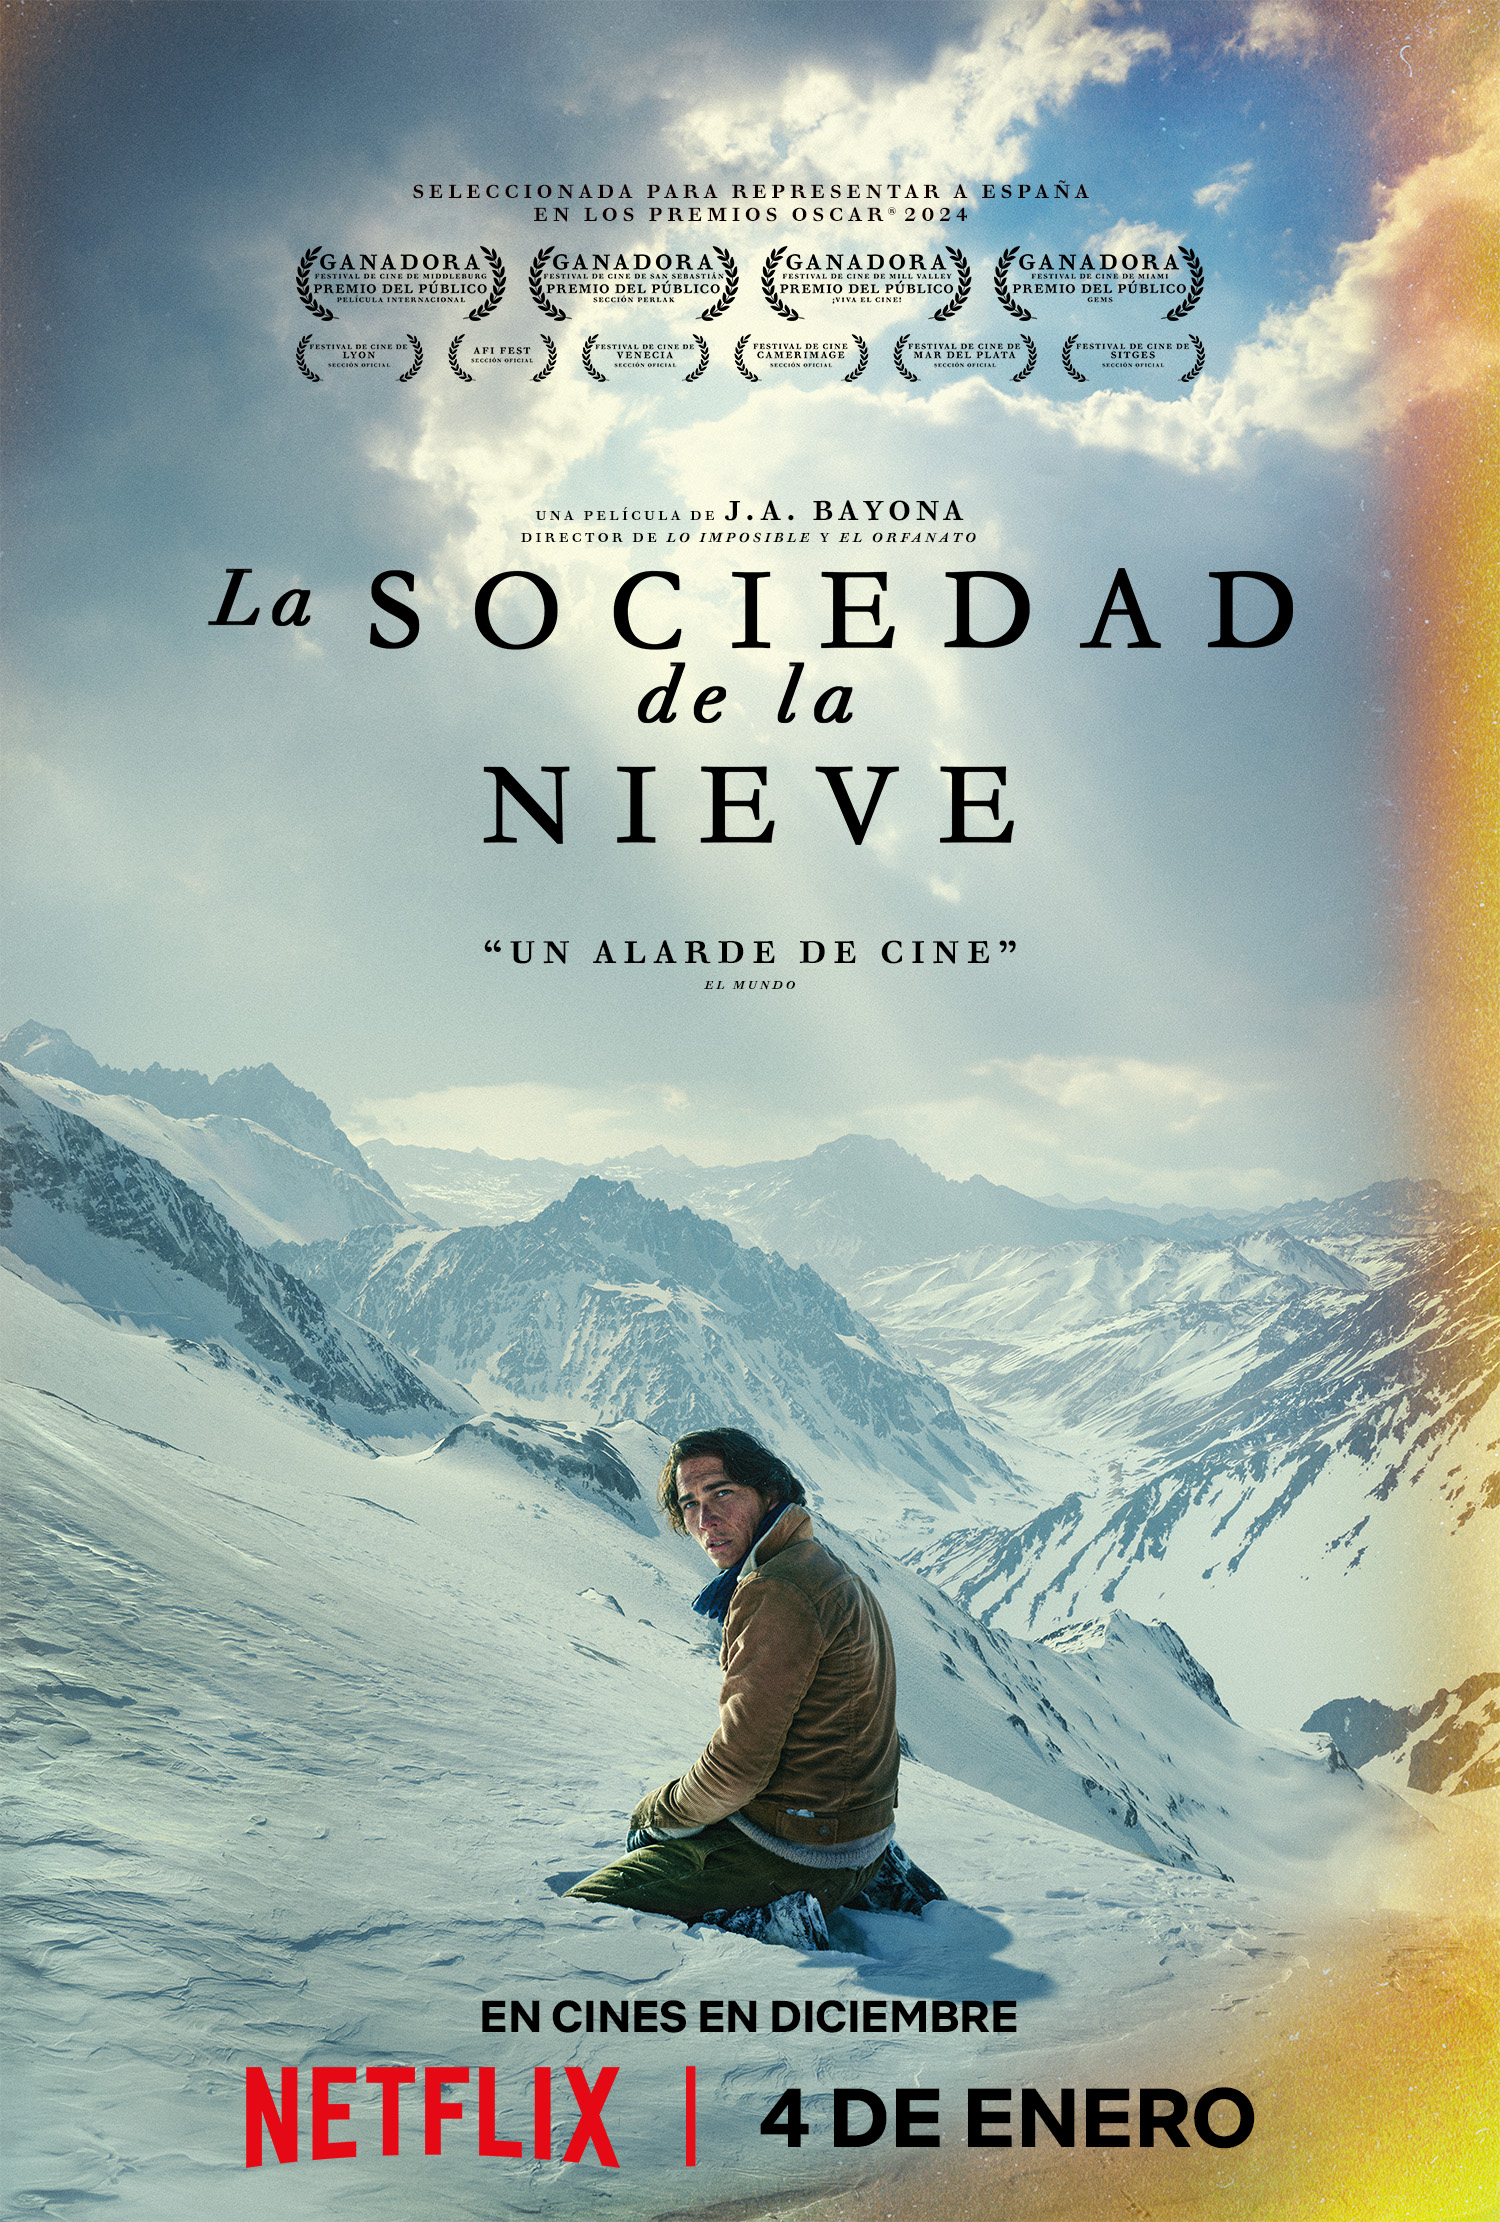 Netflix Unveils the Final Trailer for 'Society of the Snow' by J.A. Bayona  - About Netflix